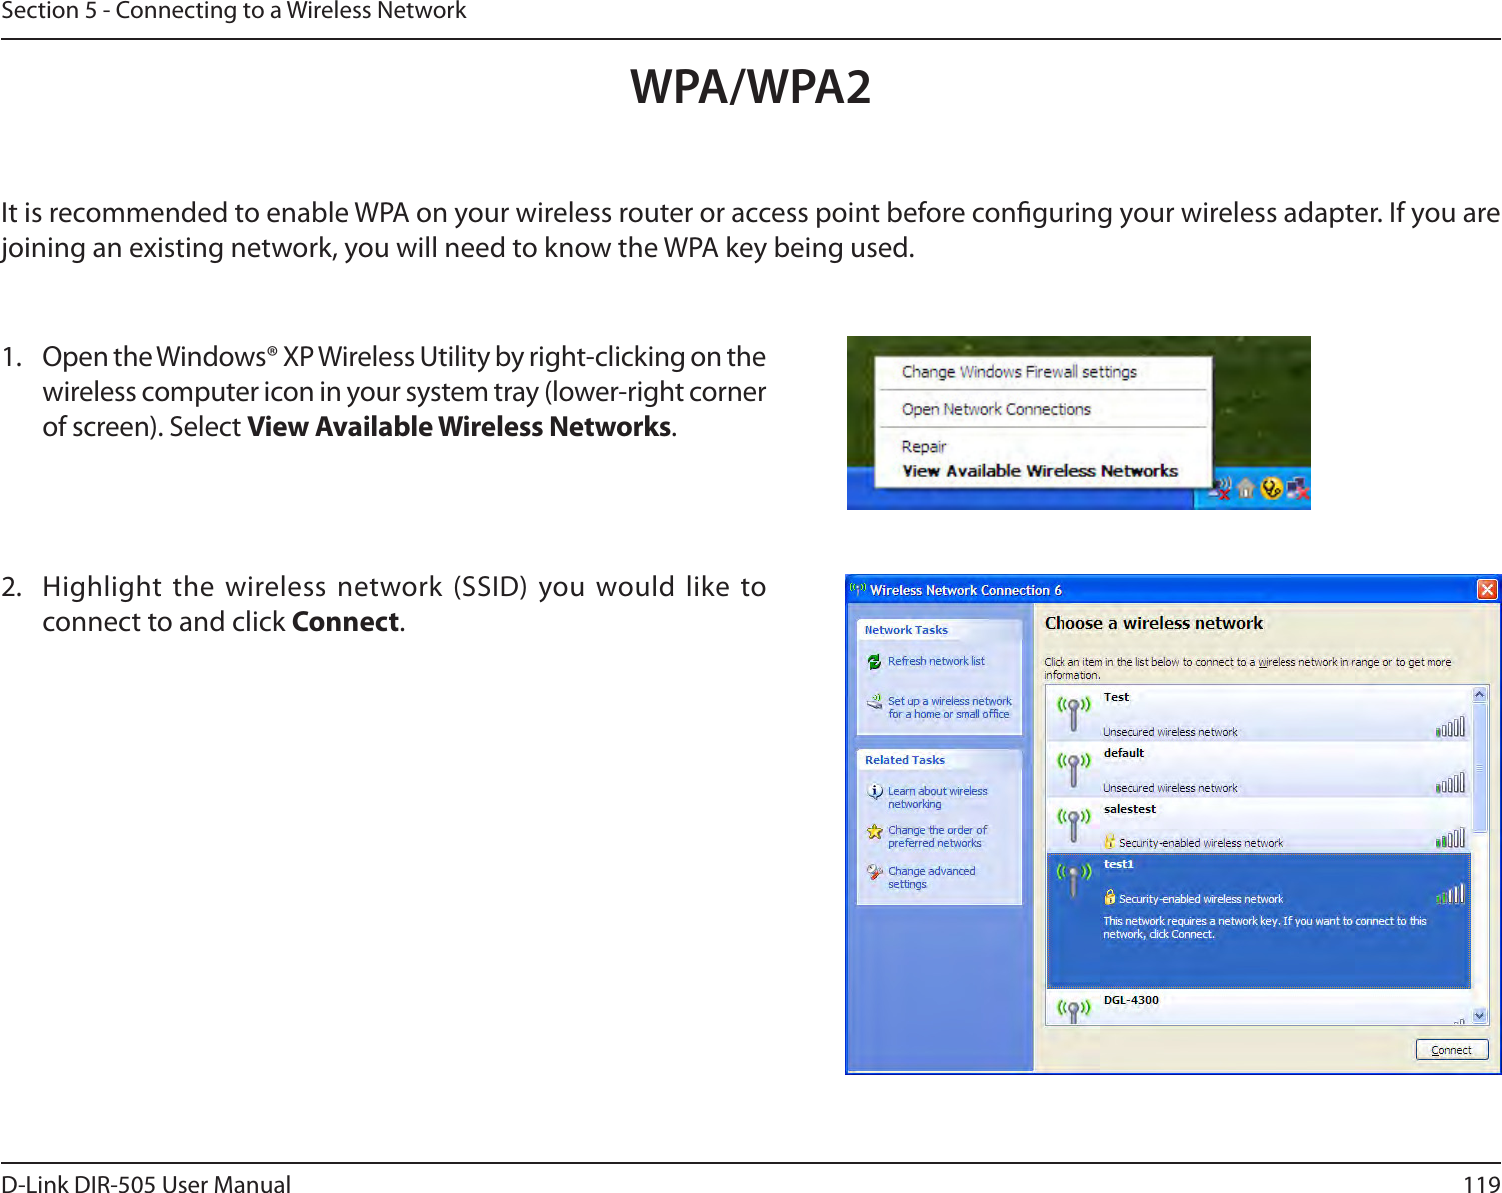 119D-Link DIR-505 User ManualSection 5 - Connecting to a Wireless NetworkIt is recommended to enable WPA on your wireless router or access point before conguring your wireless adapter. If you are joining an existing network, you will need to know the WPA key being used.2.  Highlight the  wireless network (SSID) you would like to connect to and click Connect.1.  Open the Windows® XP Wireless Utility by right-clicking on the wireless computer icon in your system tray (lower-right corner of screen). Select View Available Wireless Networks. WPA/WPA2